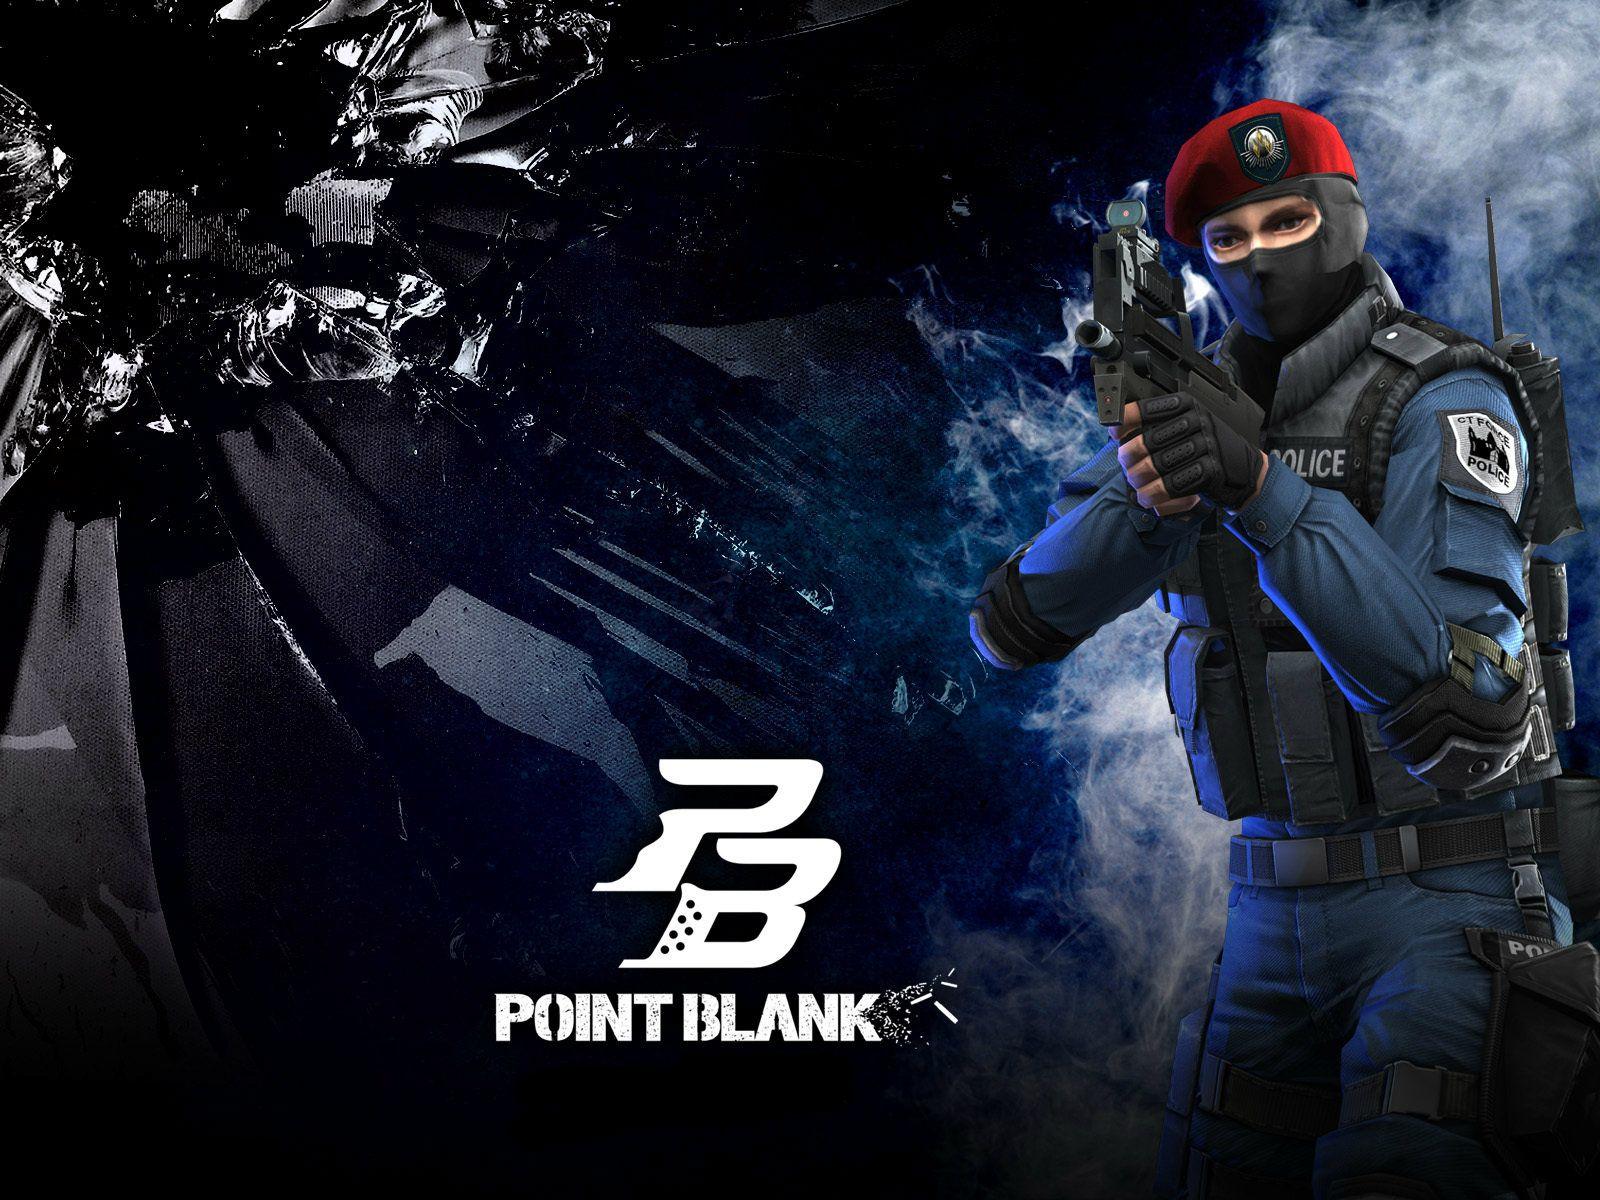 Point blank online image Point Blank HD wallpaper and background